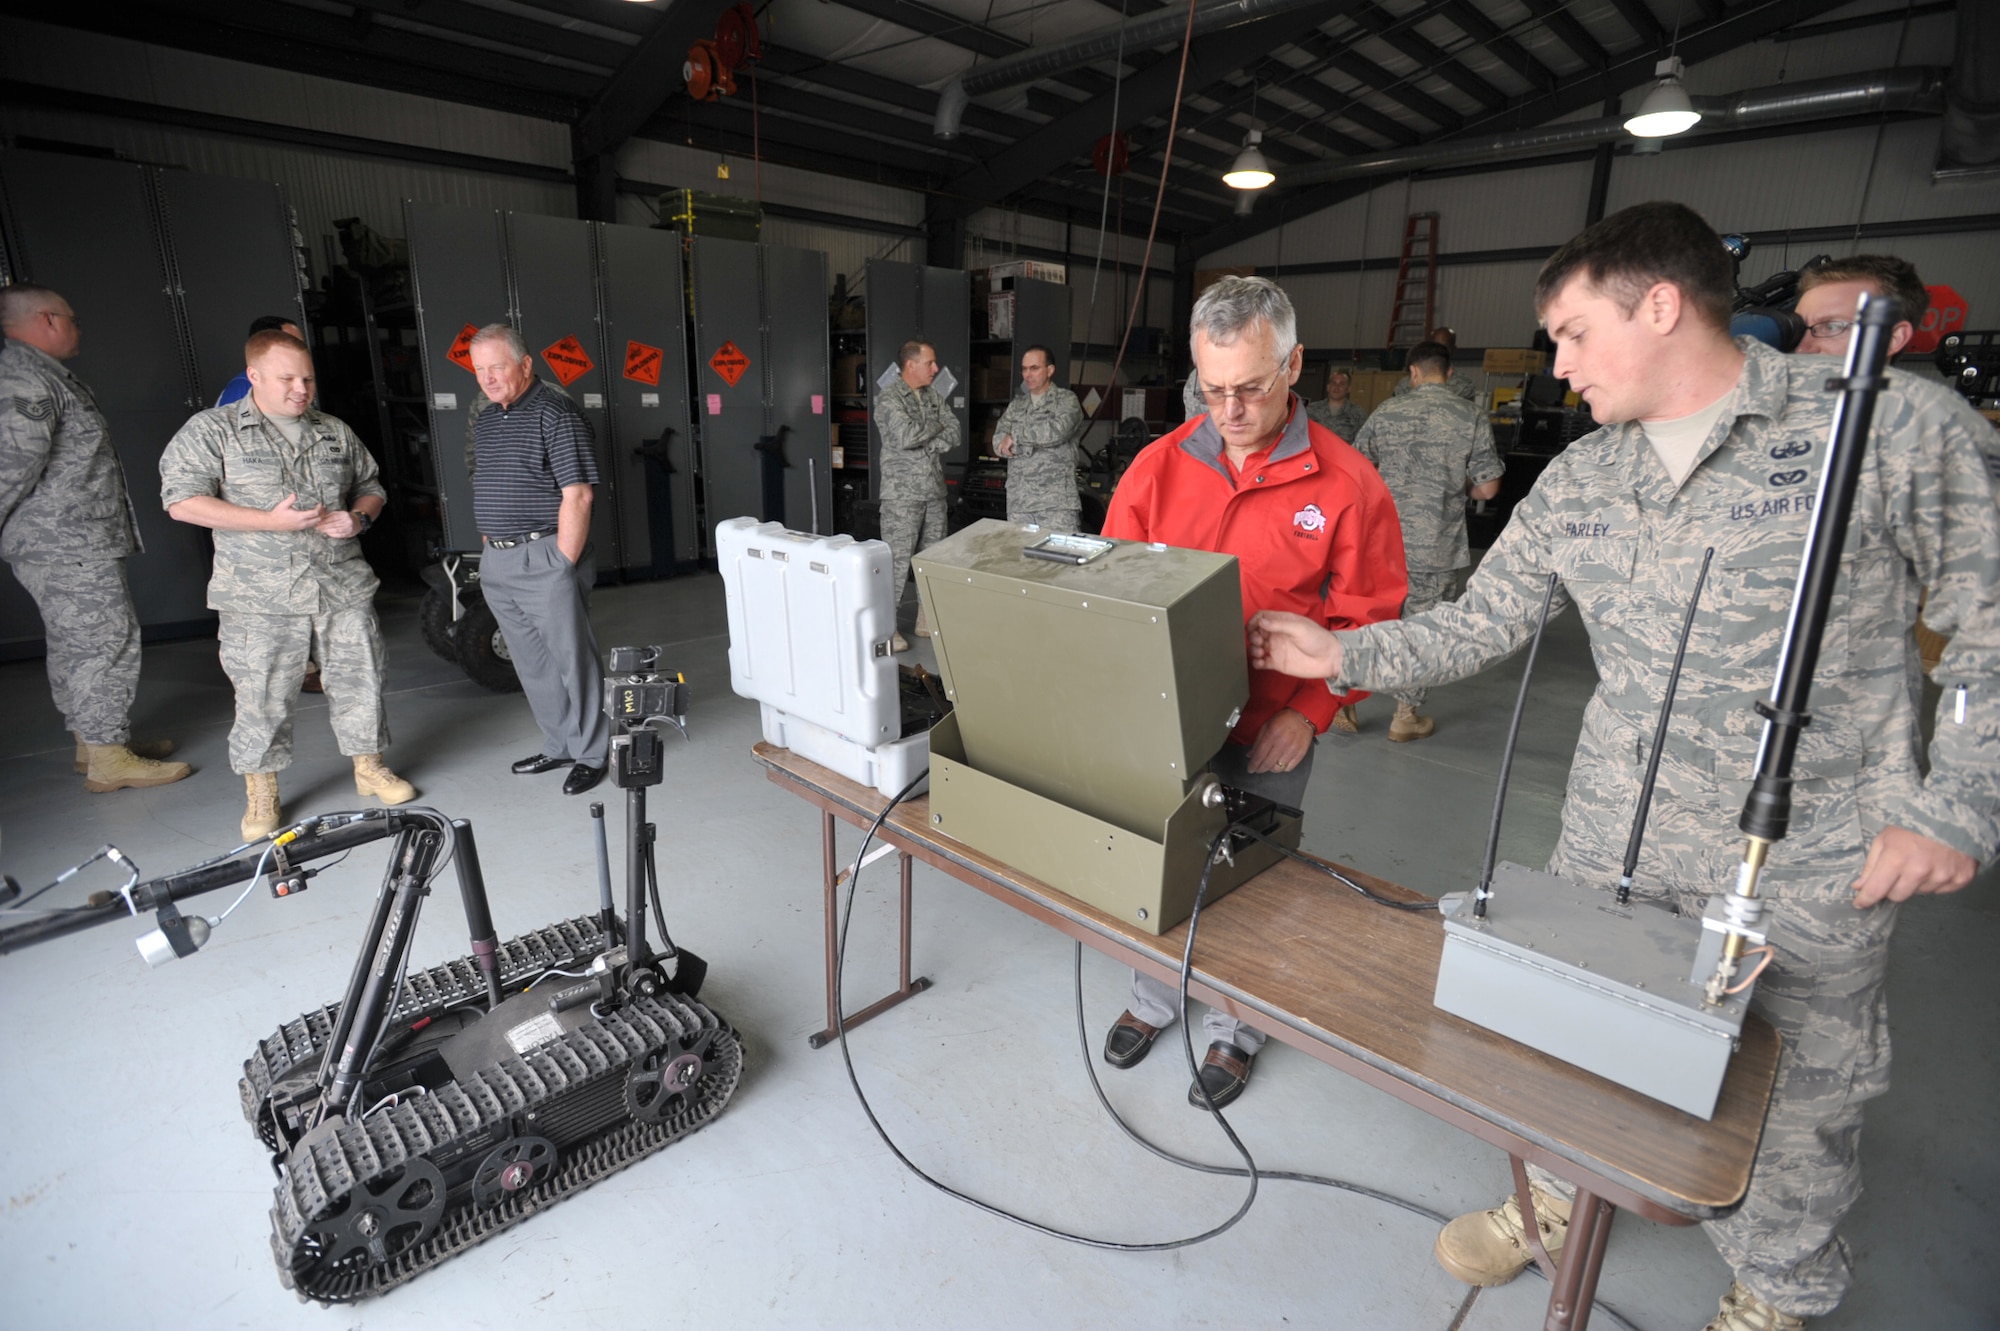 Senior Airman Eric Farley shows Jim Tressel, head football coach at Ohio State University, how to remotely control a robot used during explosive ordnance disposal missions. Airman Farley, native of Fayette, Ala., is assigned to an EOD unit at McConnell Air Force Base, Kan., where Tressel and two other coaches--Troy Calhoun of Air Force and Jim Grobe of Wake Forest--visited at the start of a morale-boosting mission called Coaches Tour 2009. (U.S. Air Force photo/Tech. Sgt. Jason Schaap)